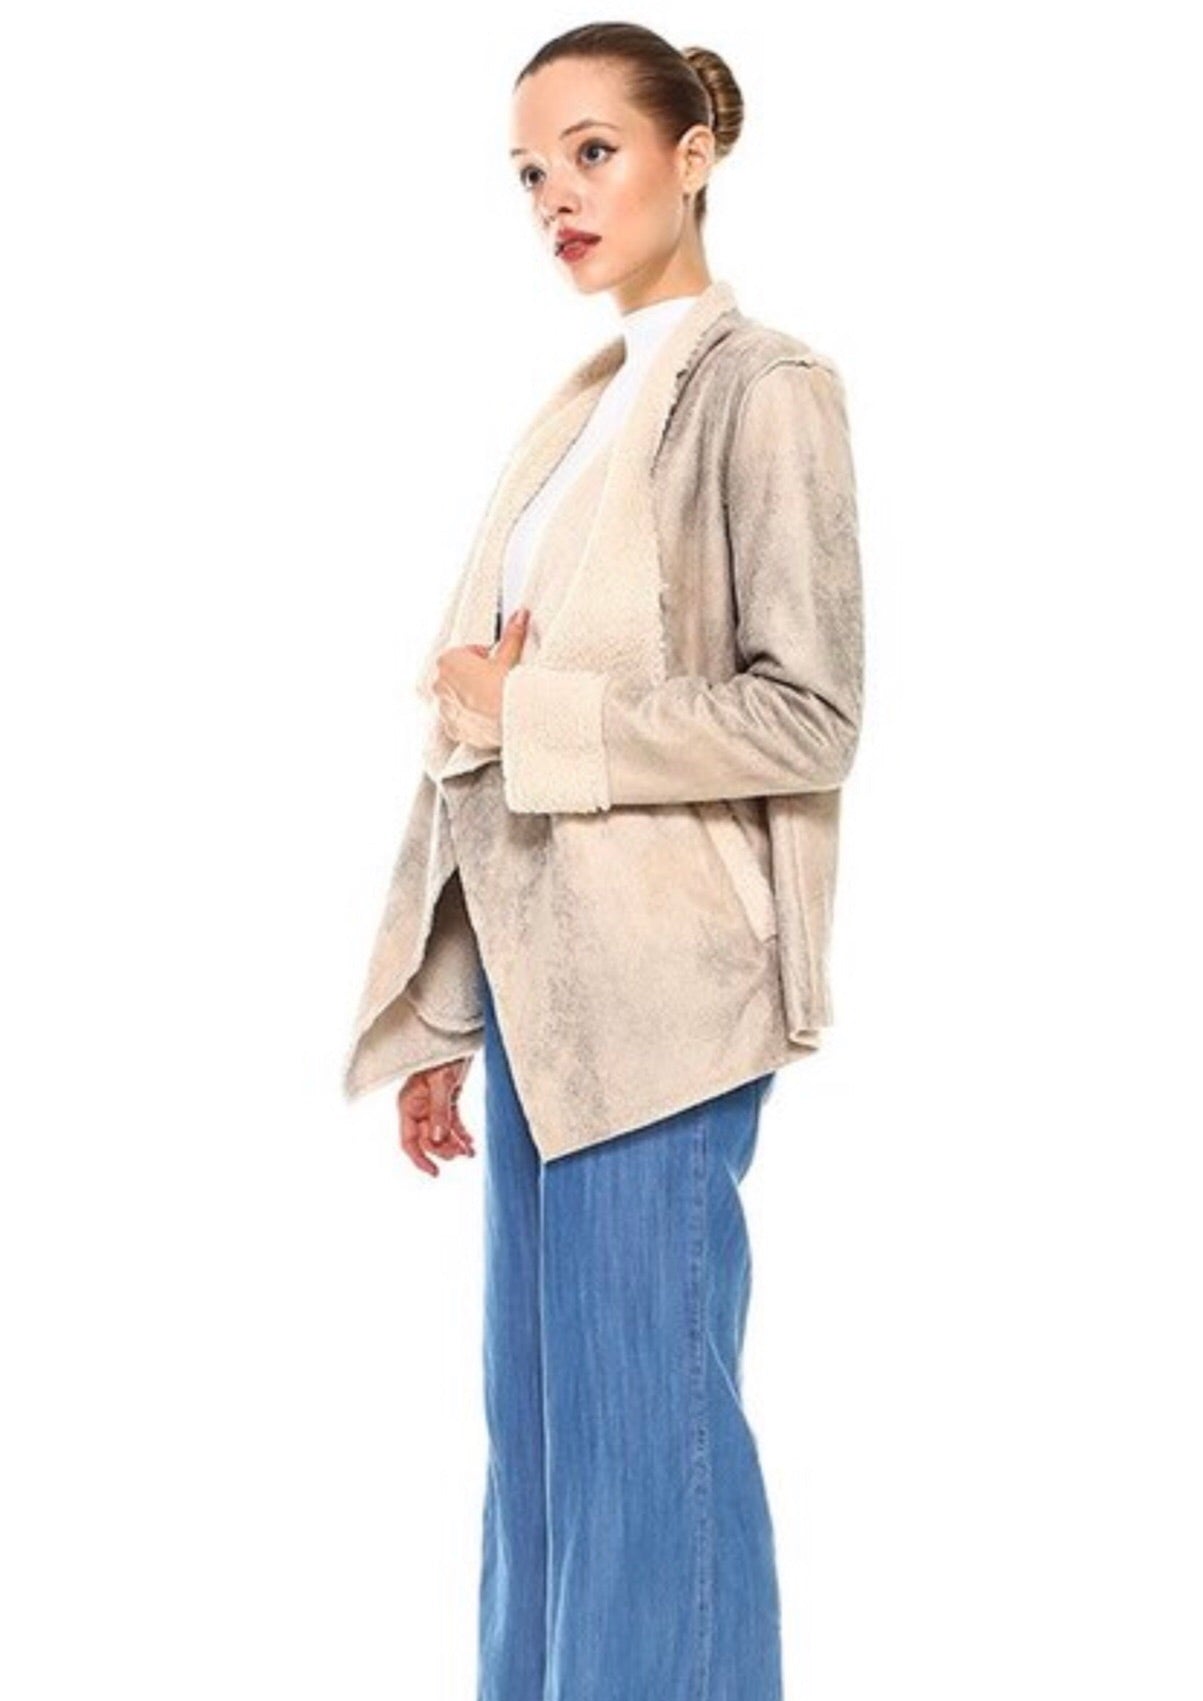 Mindy Suede Jacket - Corinne an Affordable Women's Clothing Boutique in the US USA